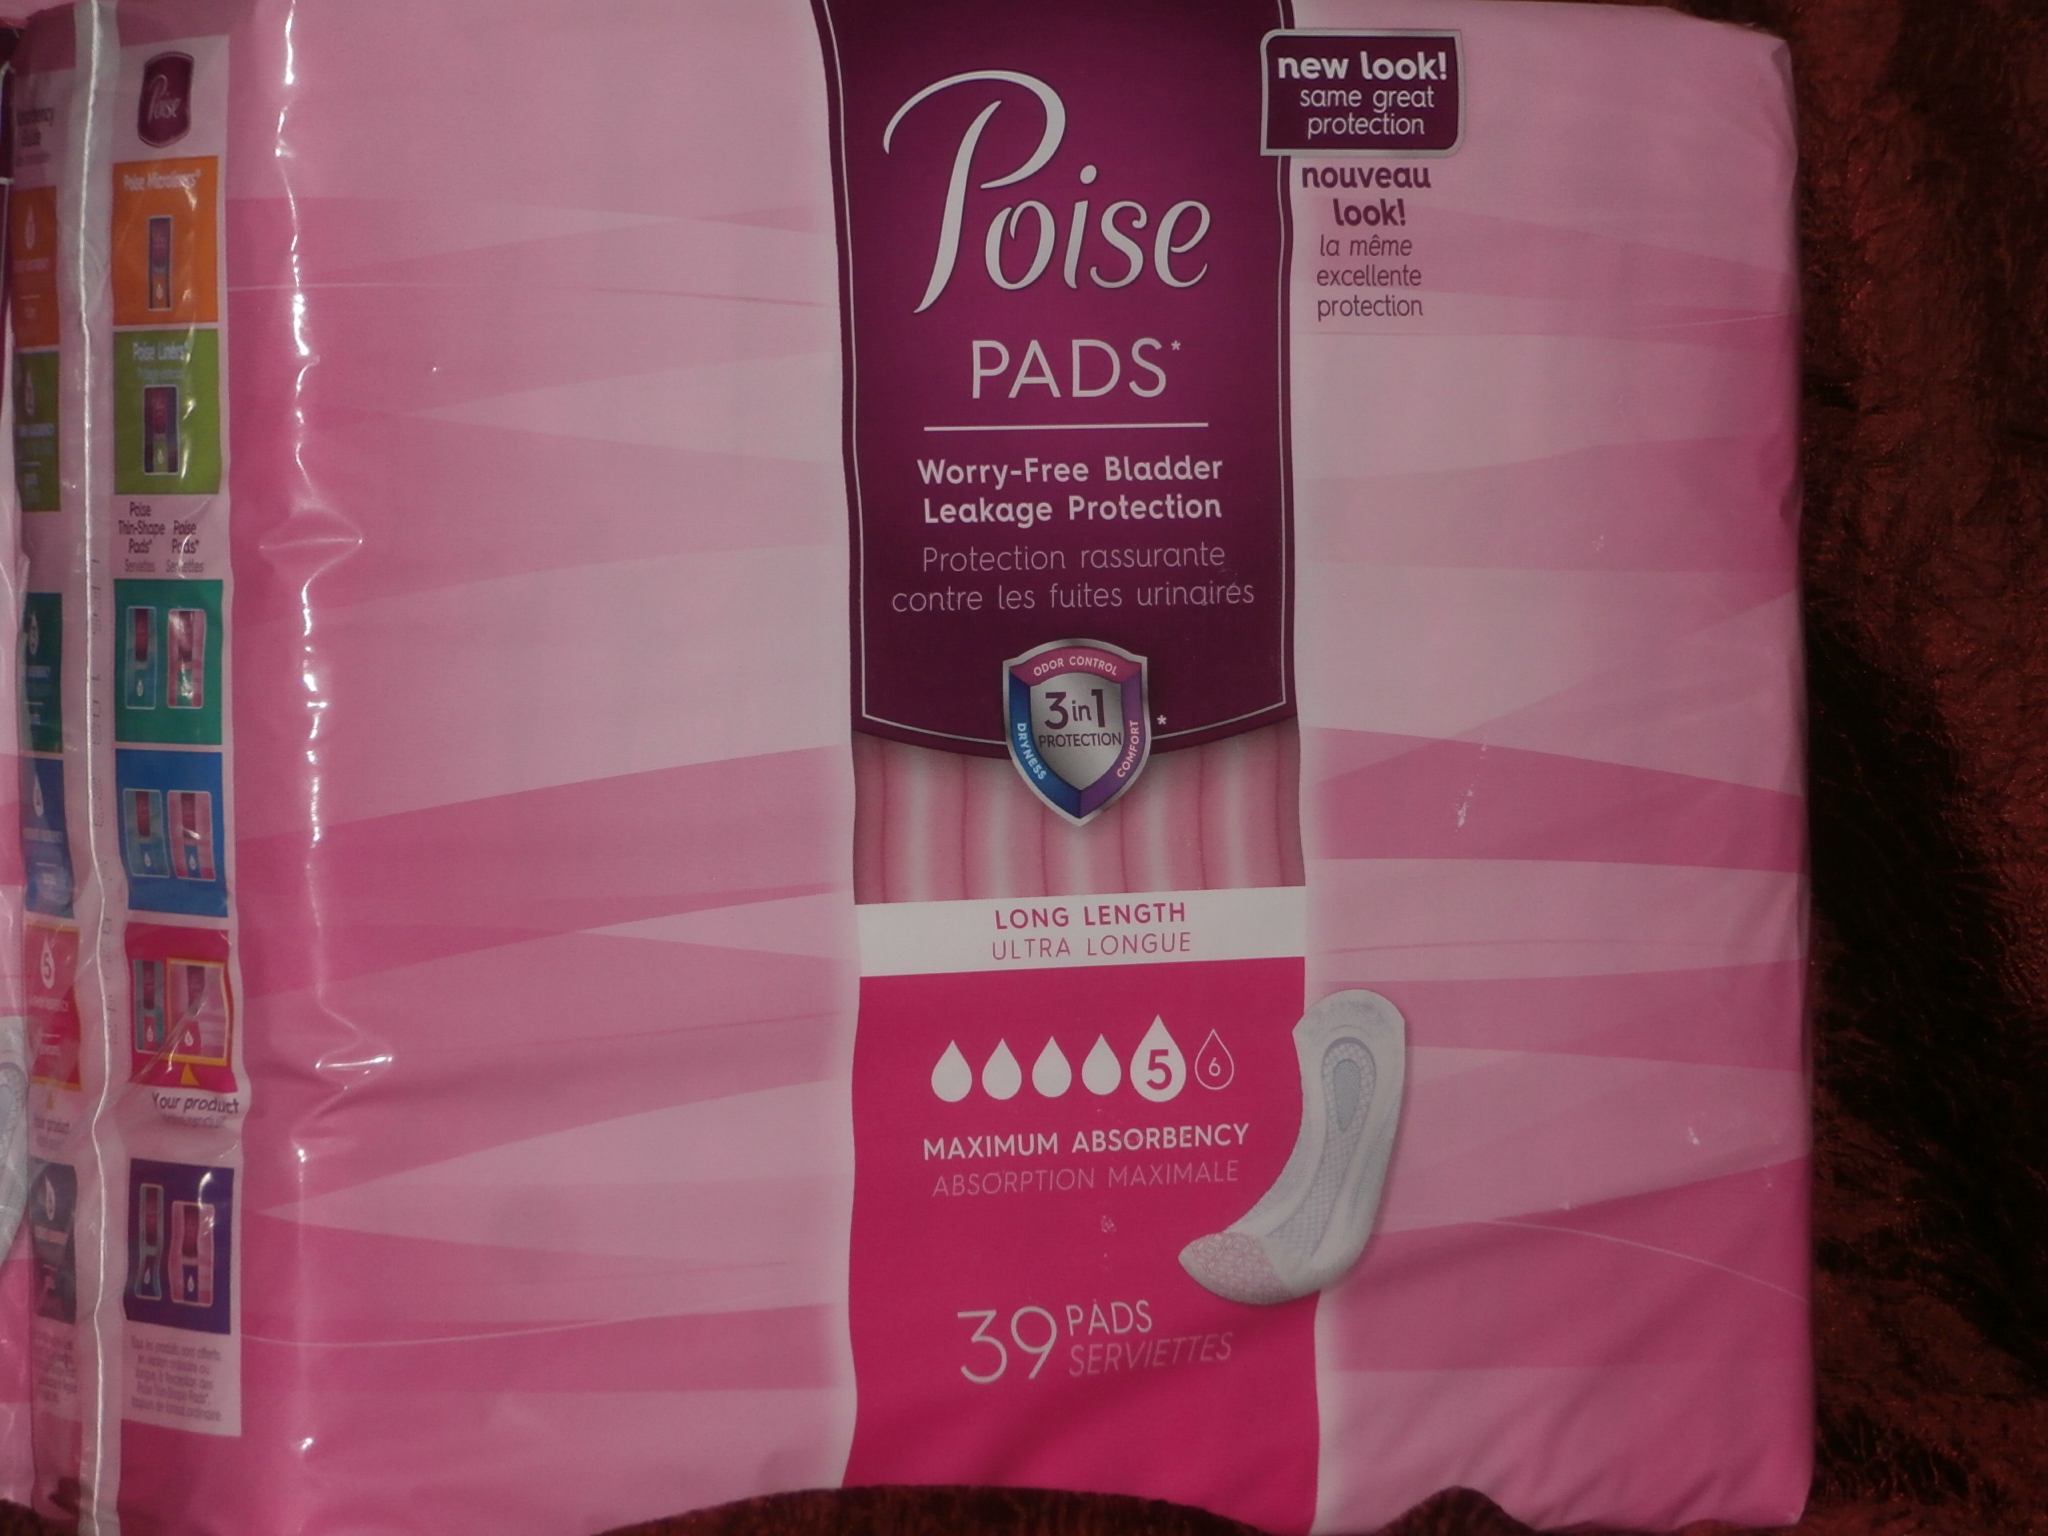 Poise: Comfy, Absorbent and Now I Can #LiveWithoutLeaks @Poise